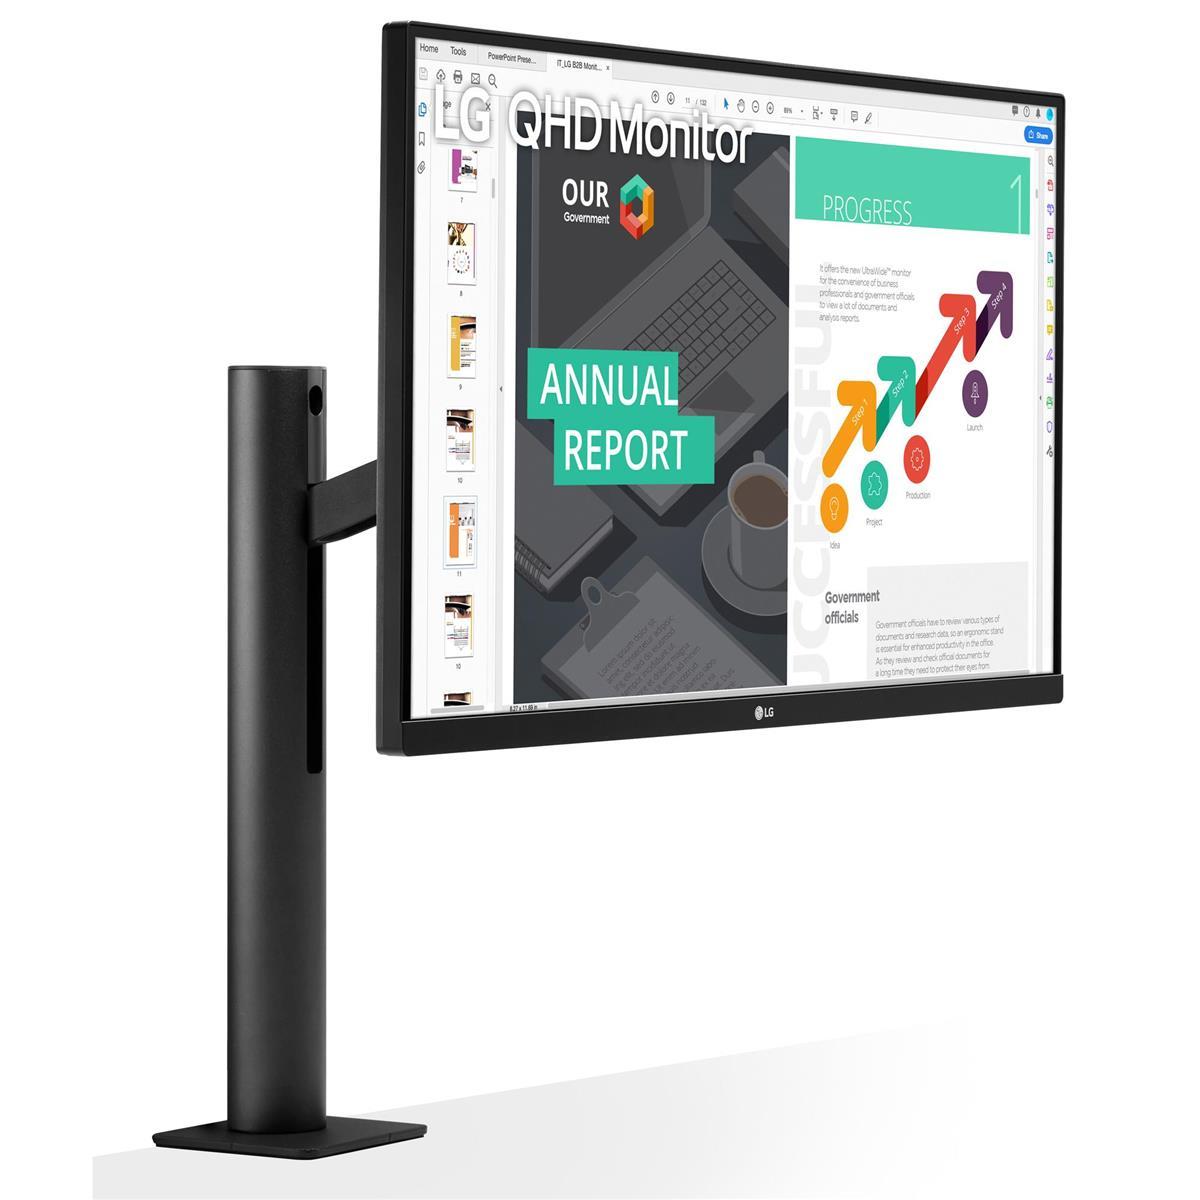 27" LG 27QN880-B 2560x1440 IPS Monitor w/ USB Type-C and Ergo Stand $320 + free s/h at Adorama